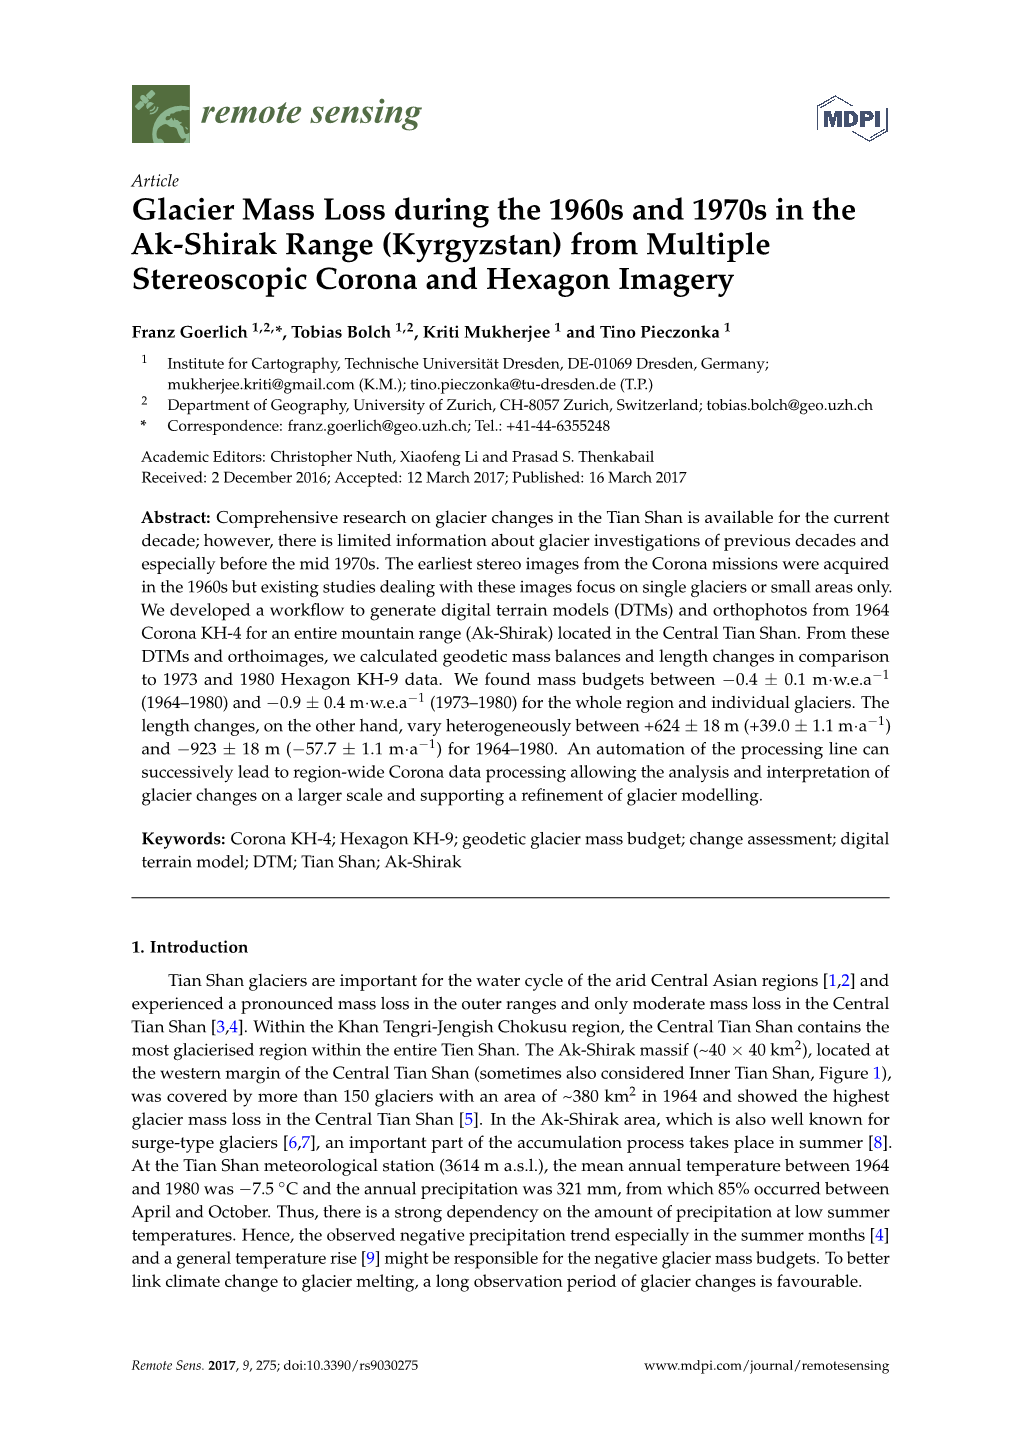 Glacier Mass Loss During the 1960S and 1970S in the Ak-Shirak Range (Kyrgyzstan) from Multiple Stereoscopic Corona and Hexagon Imagery